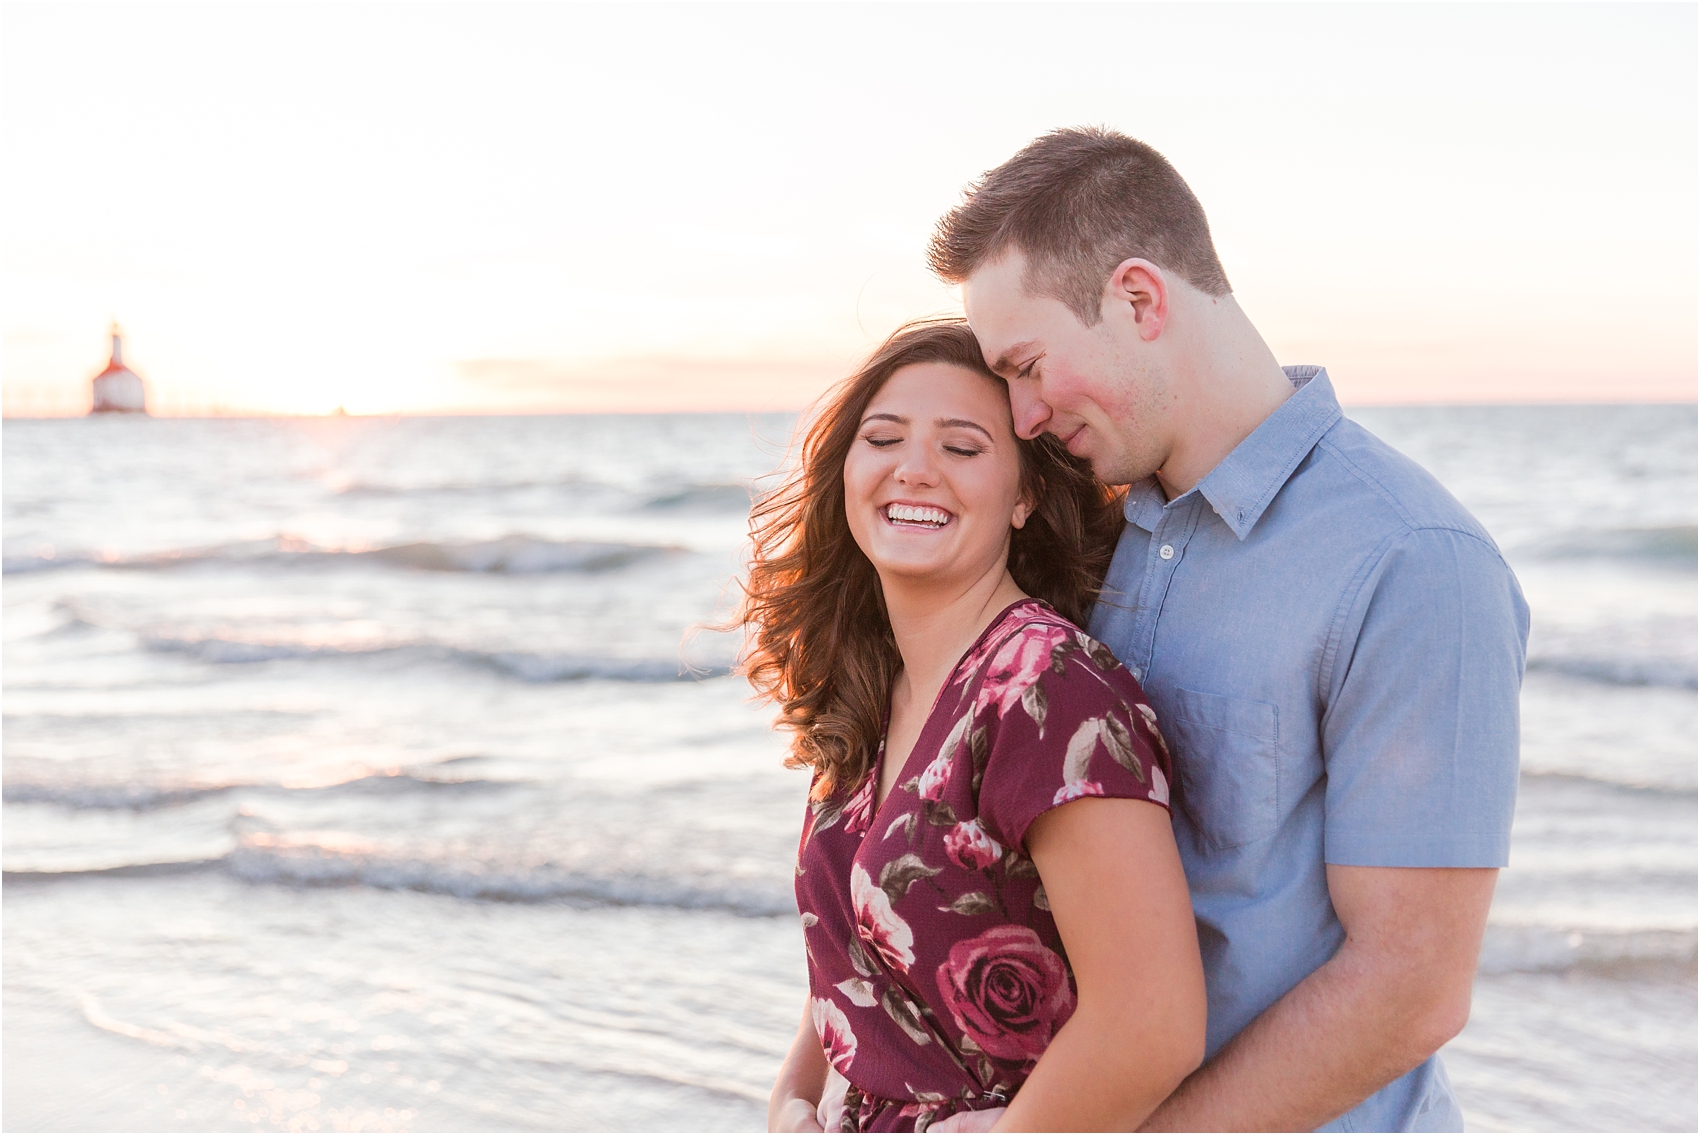 candid-end-of-summer-sunset-engagement-photos-at-silver-beach-in-st-joseph-mi-by-courtney-carolyn-photography_0033.jpg